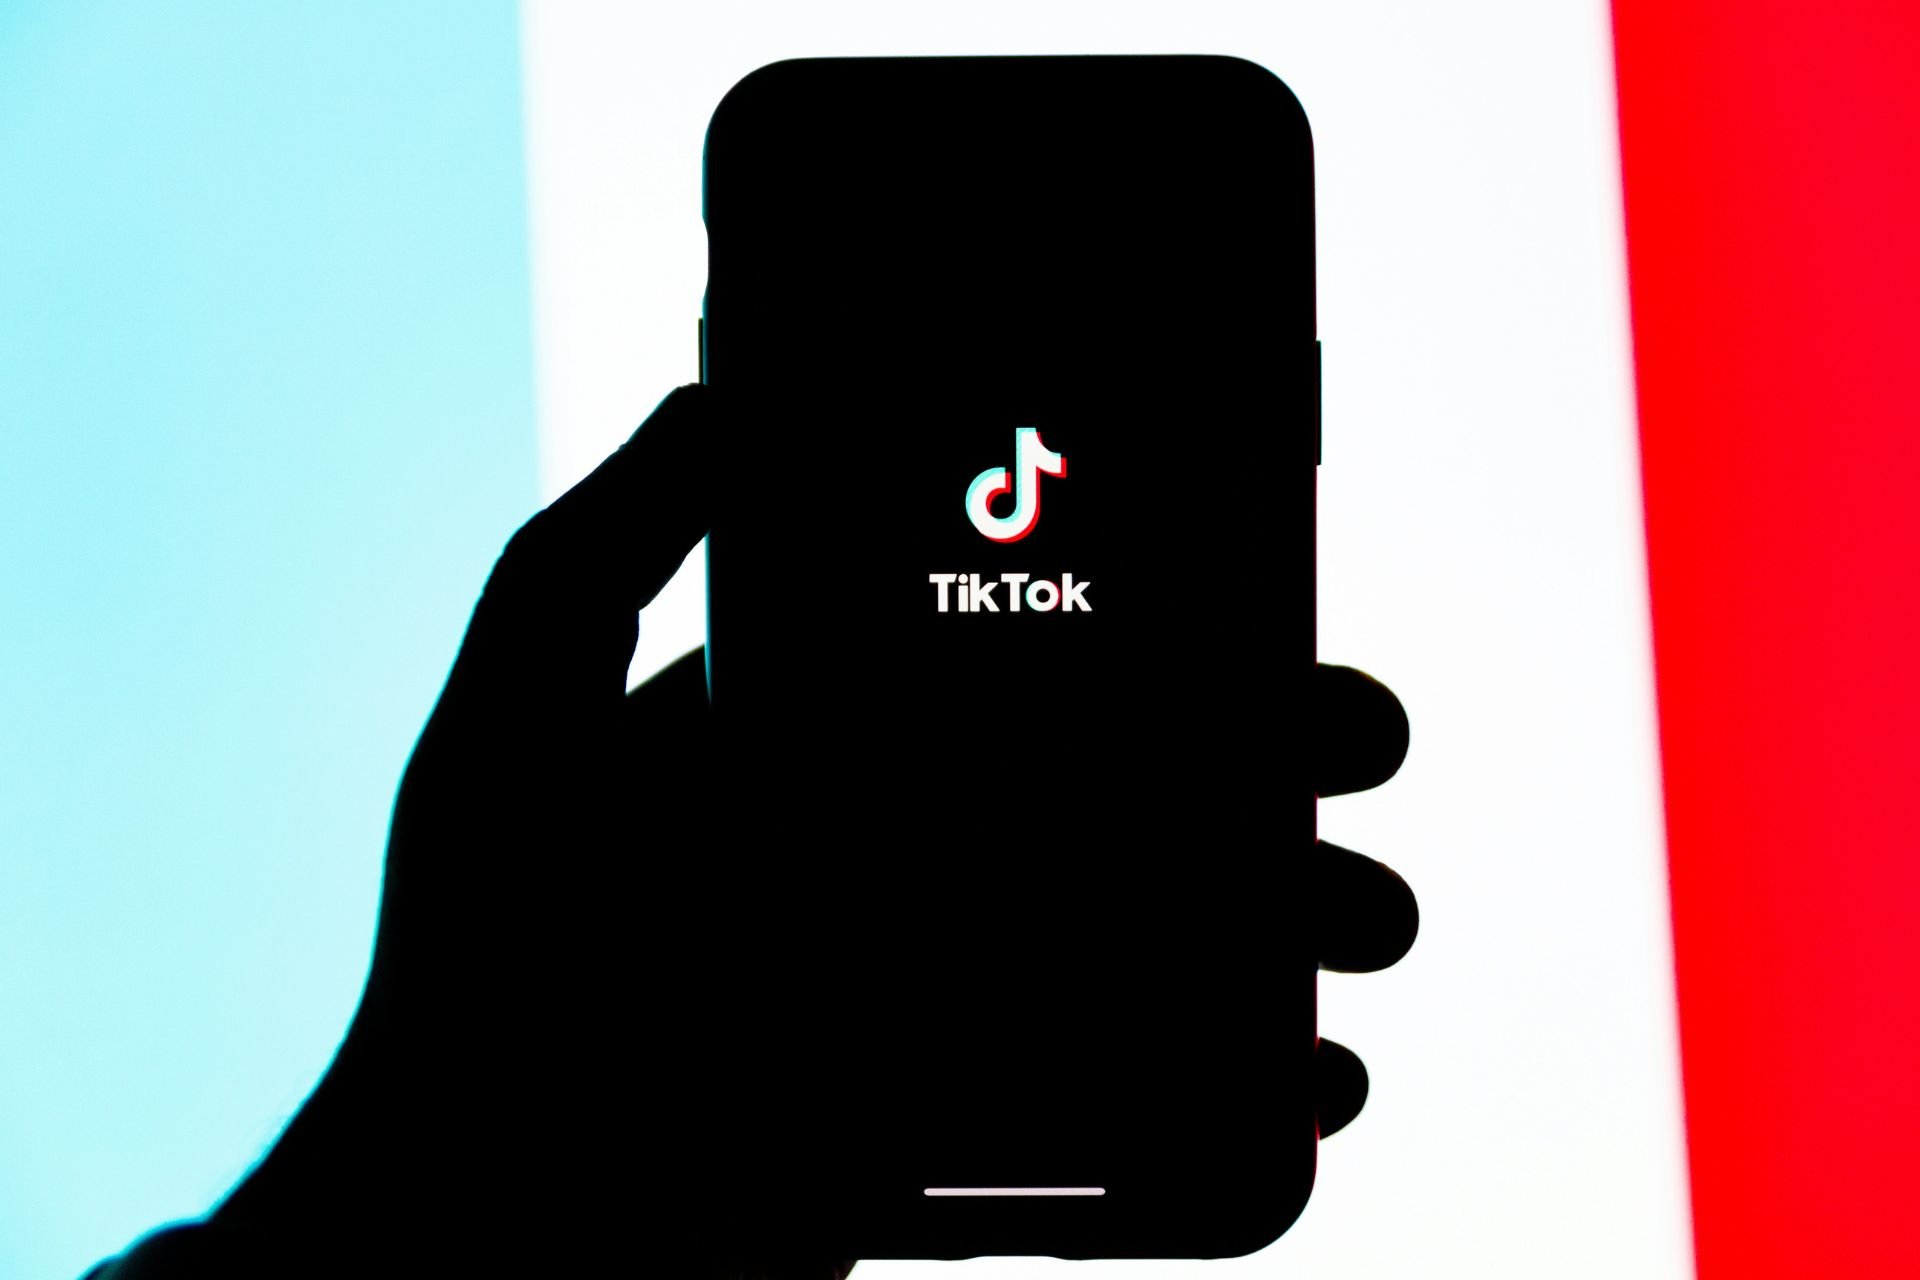 TikTok is reportedly working on an AI voice-cloning feature for its app